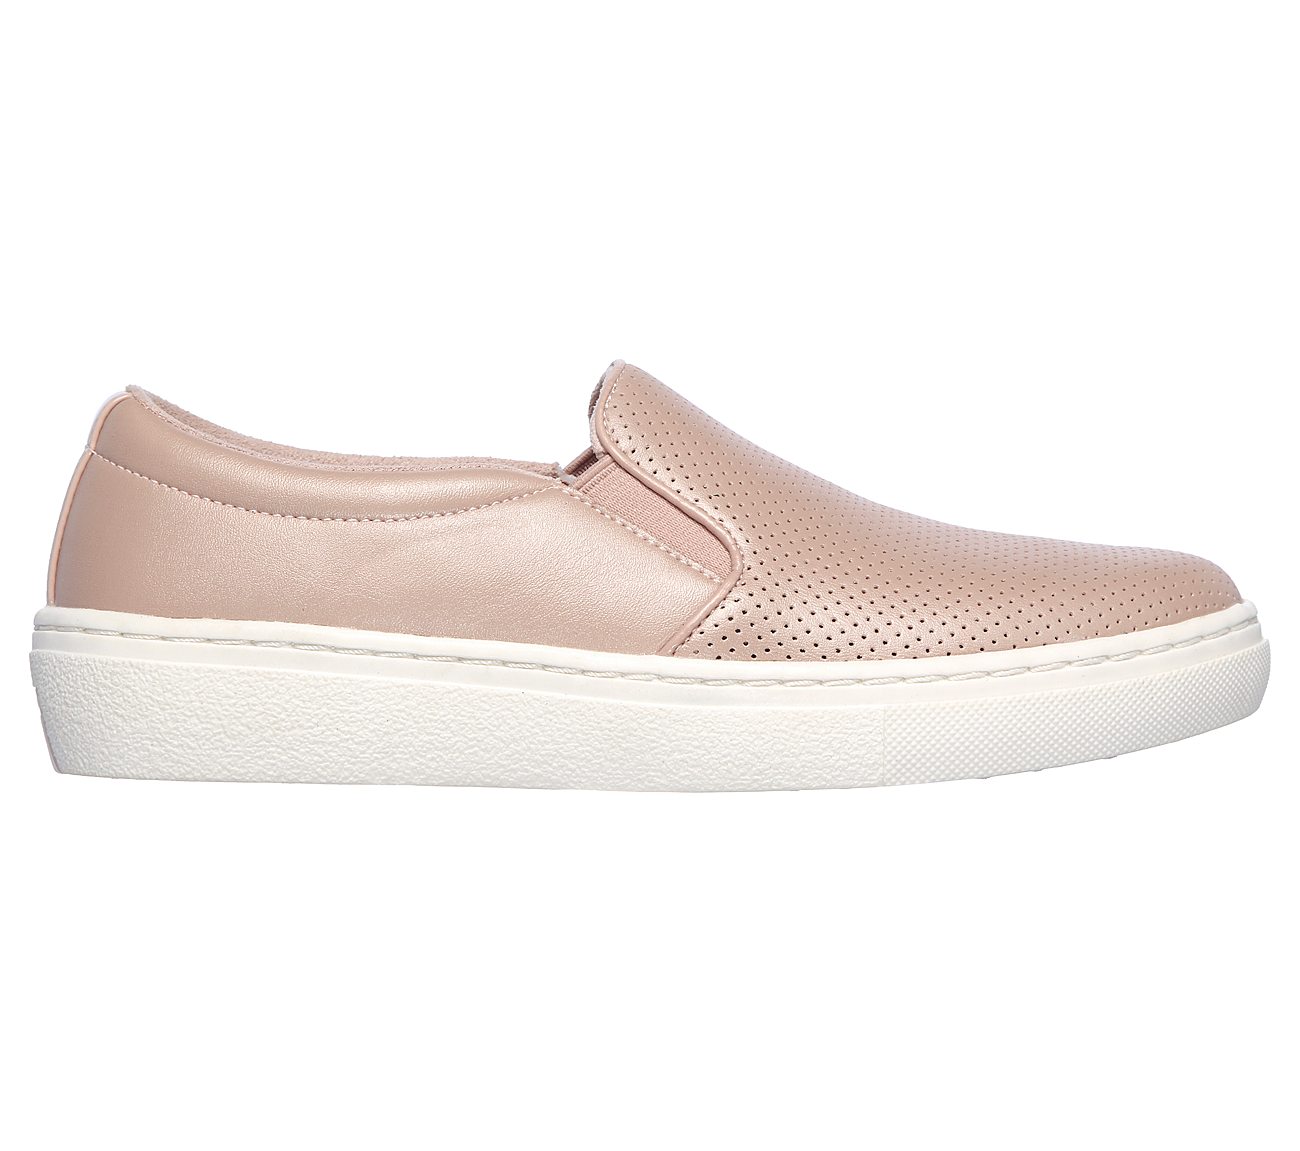 GOLDIE-PLANE JANE, LLLIGHT PINK Footwear Lateral View